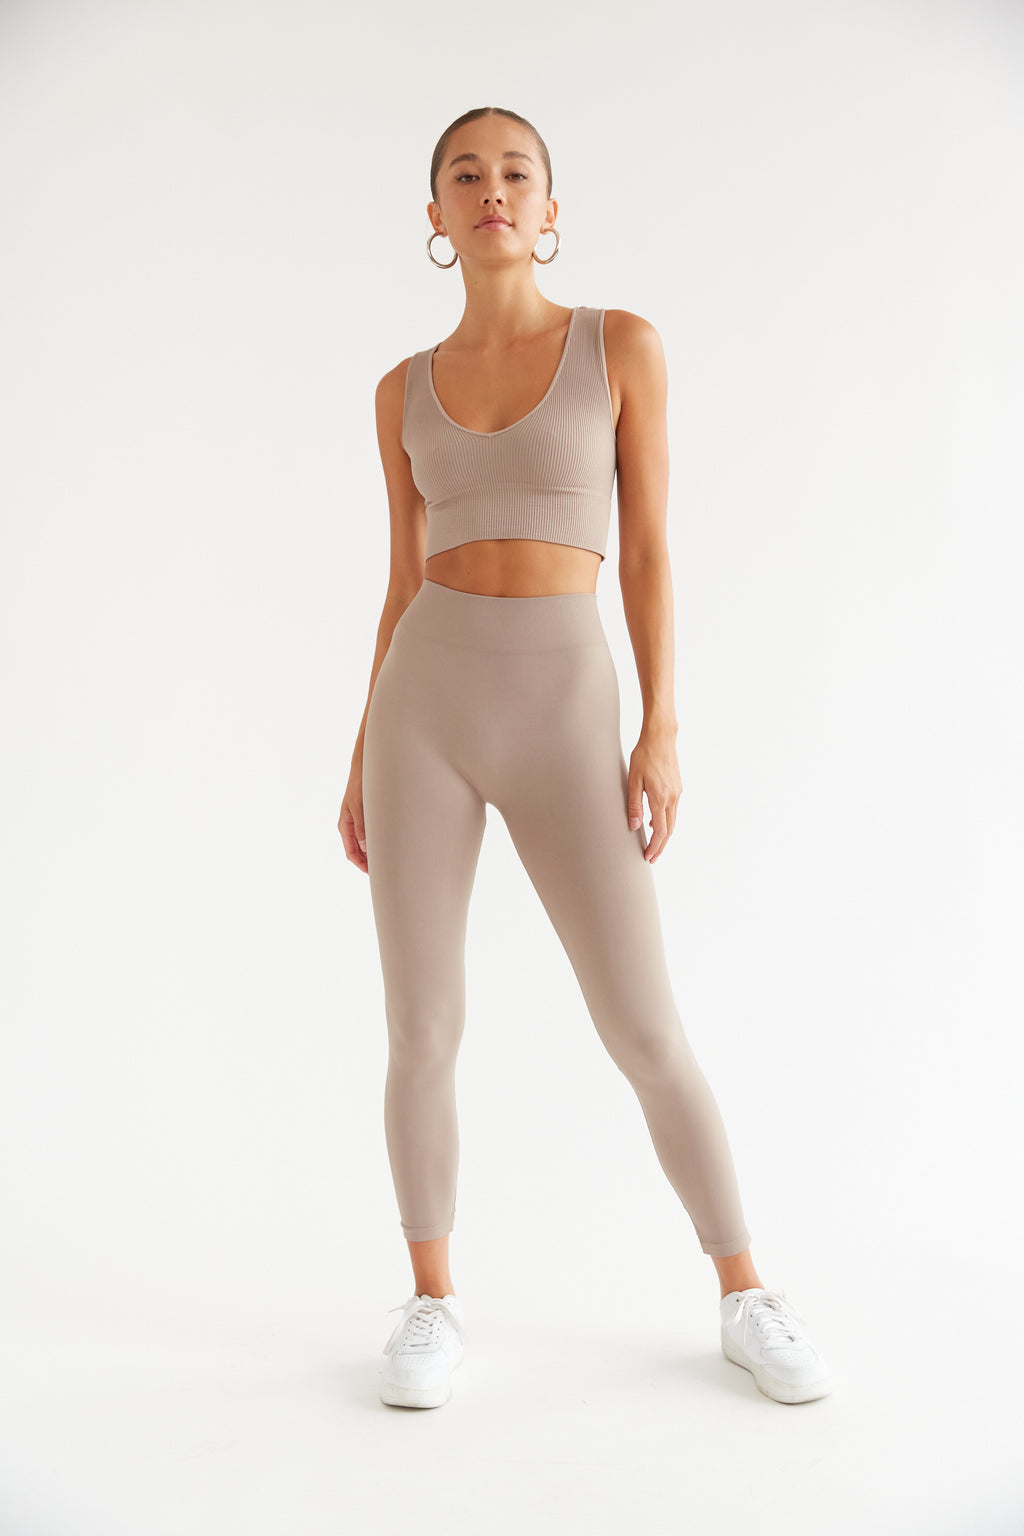 Good American Angled Rib Summer Sand Cream Leggings Women's Size 2 X-Small  NWT - $58 New With Tags - From Taylor